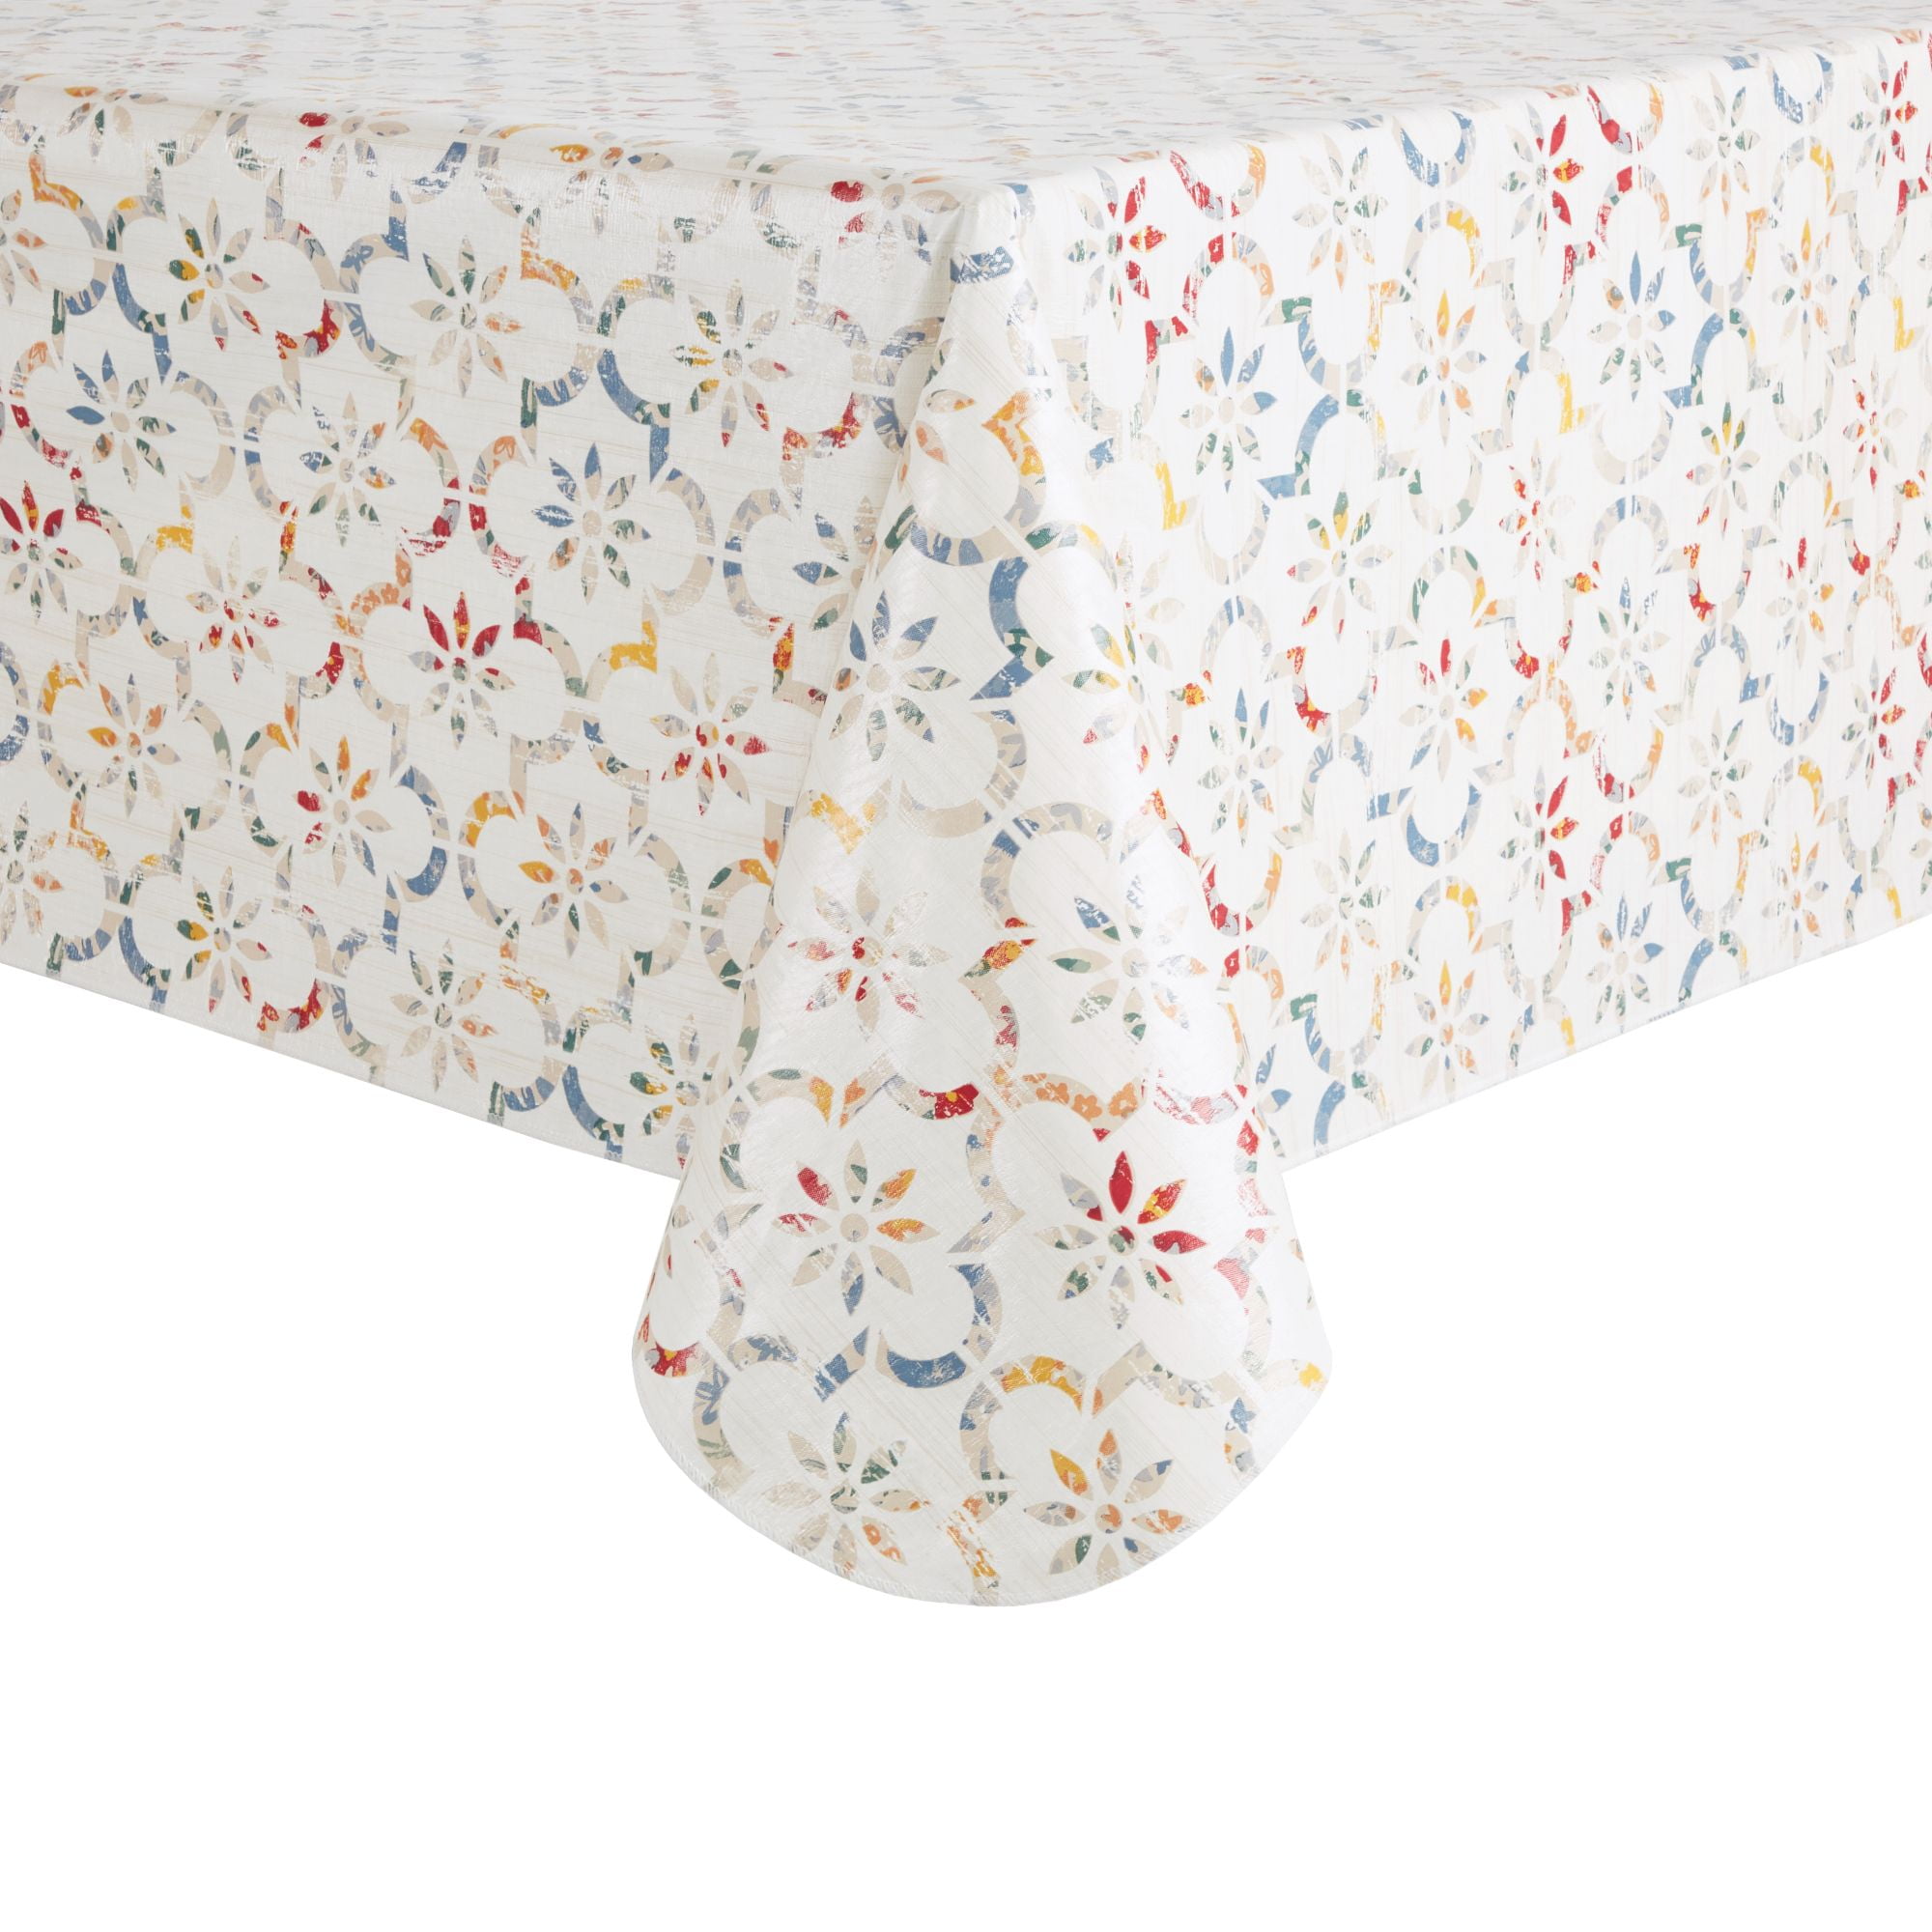 Mainstays Ogee Tile PEVA Tablecloth, Multi, 60"W x 84"L Rectangle, Available in various sizes